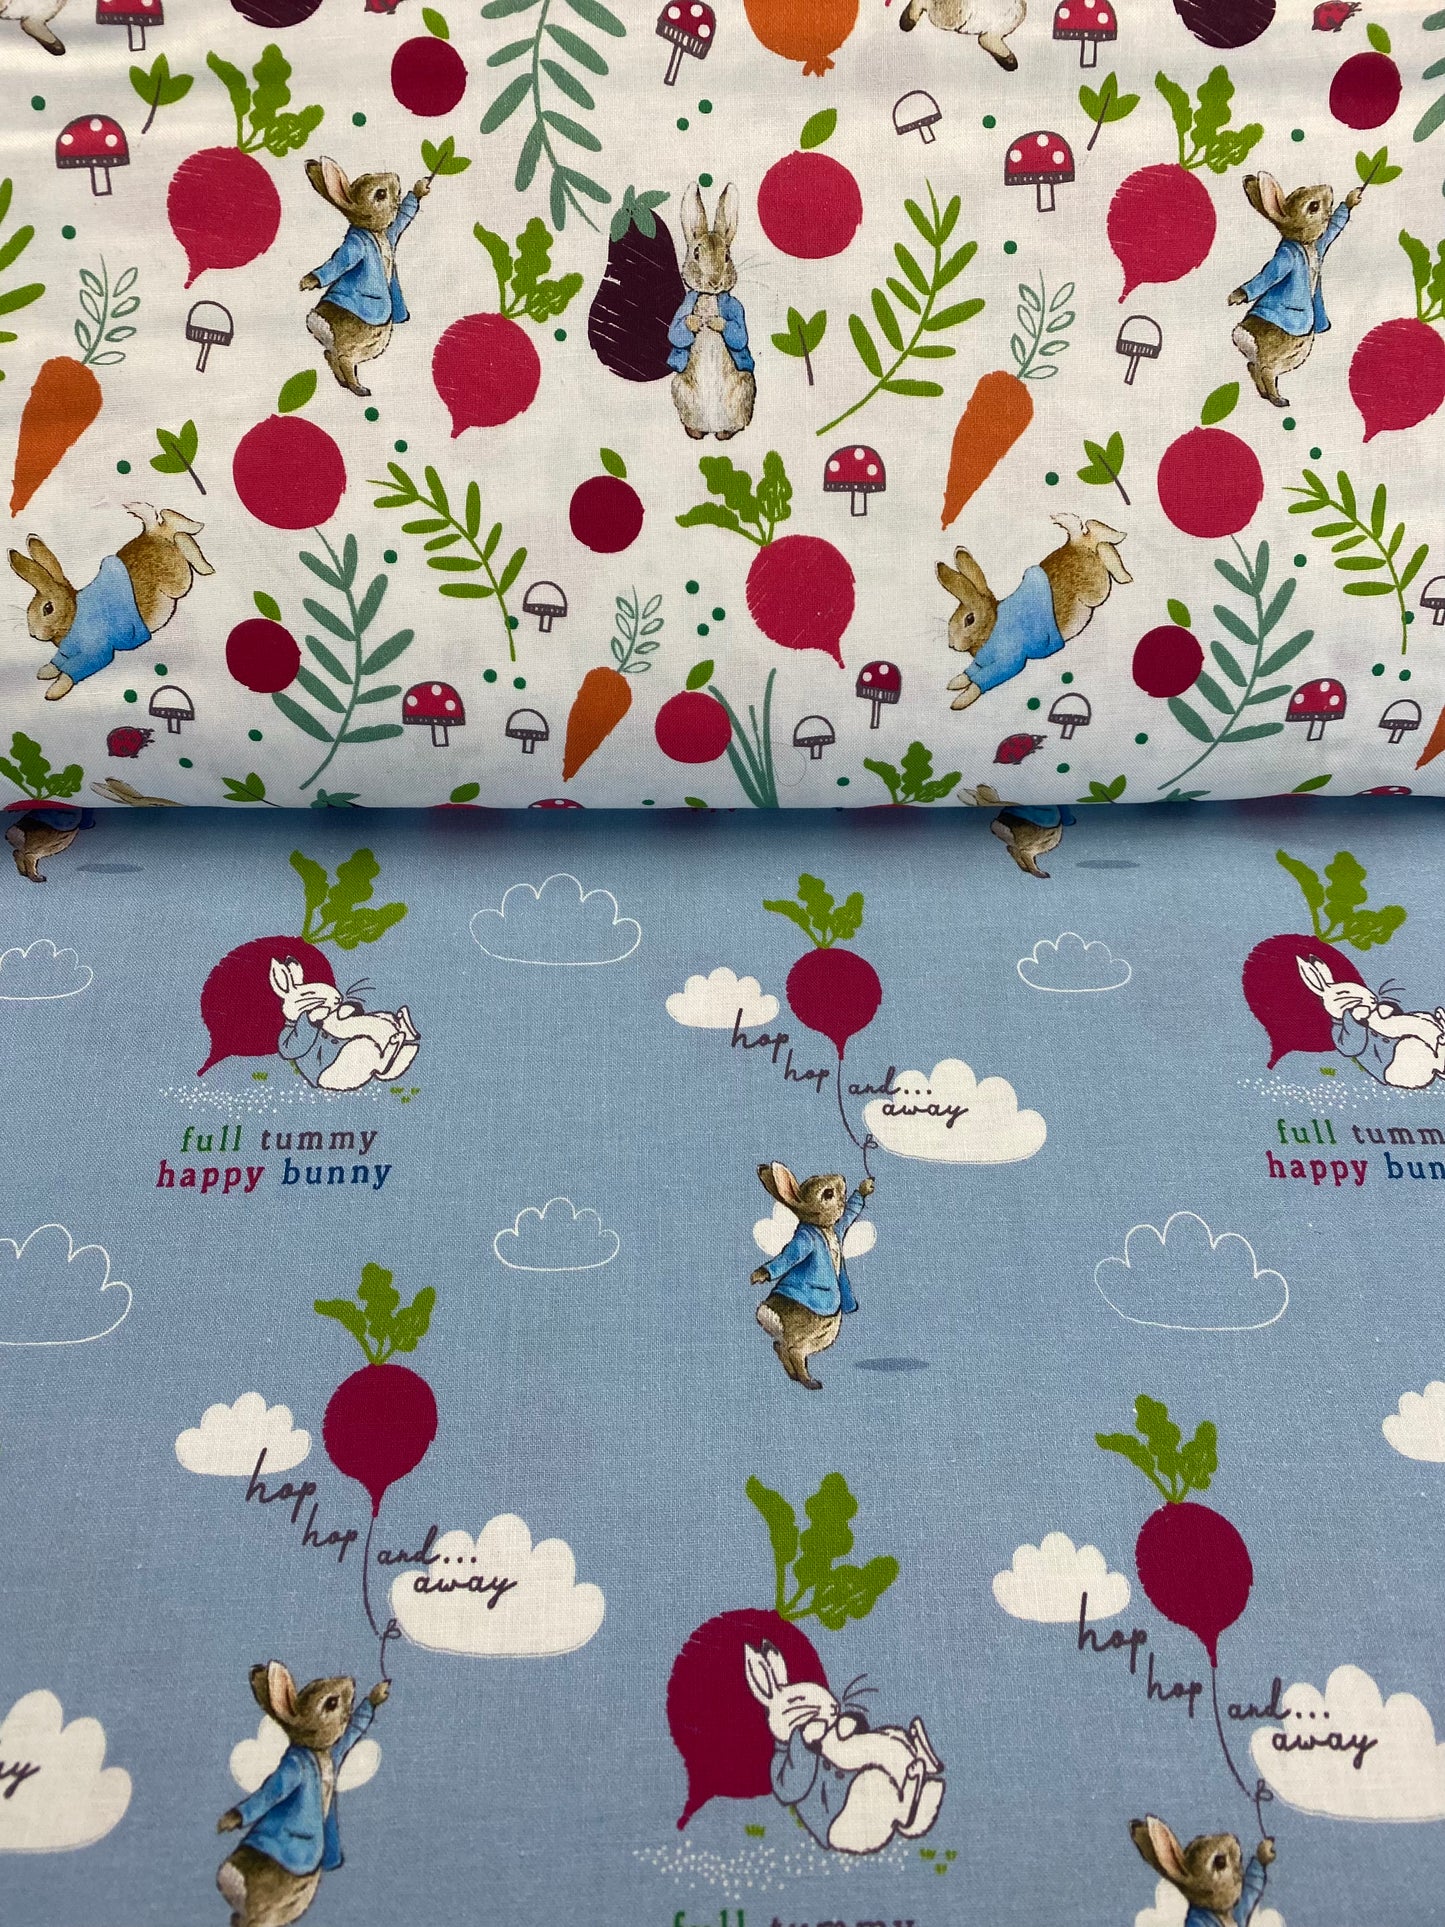 Peter Rabbit Homegrown Happiness by Beatriz Potter Hop Hop and Away Digitally Printed 2870C-02 Cotton Woven Fabric